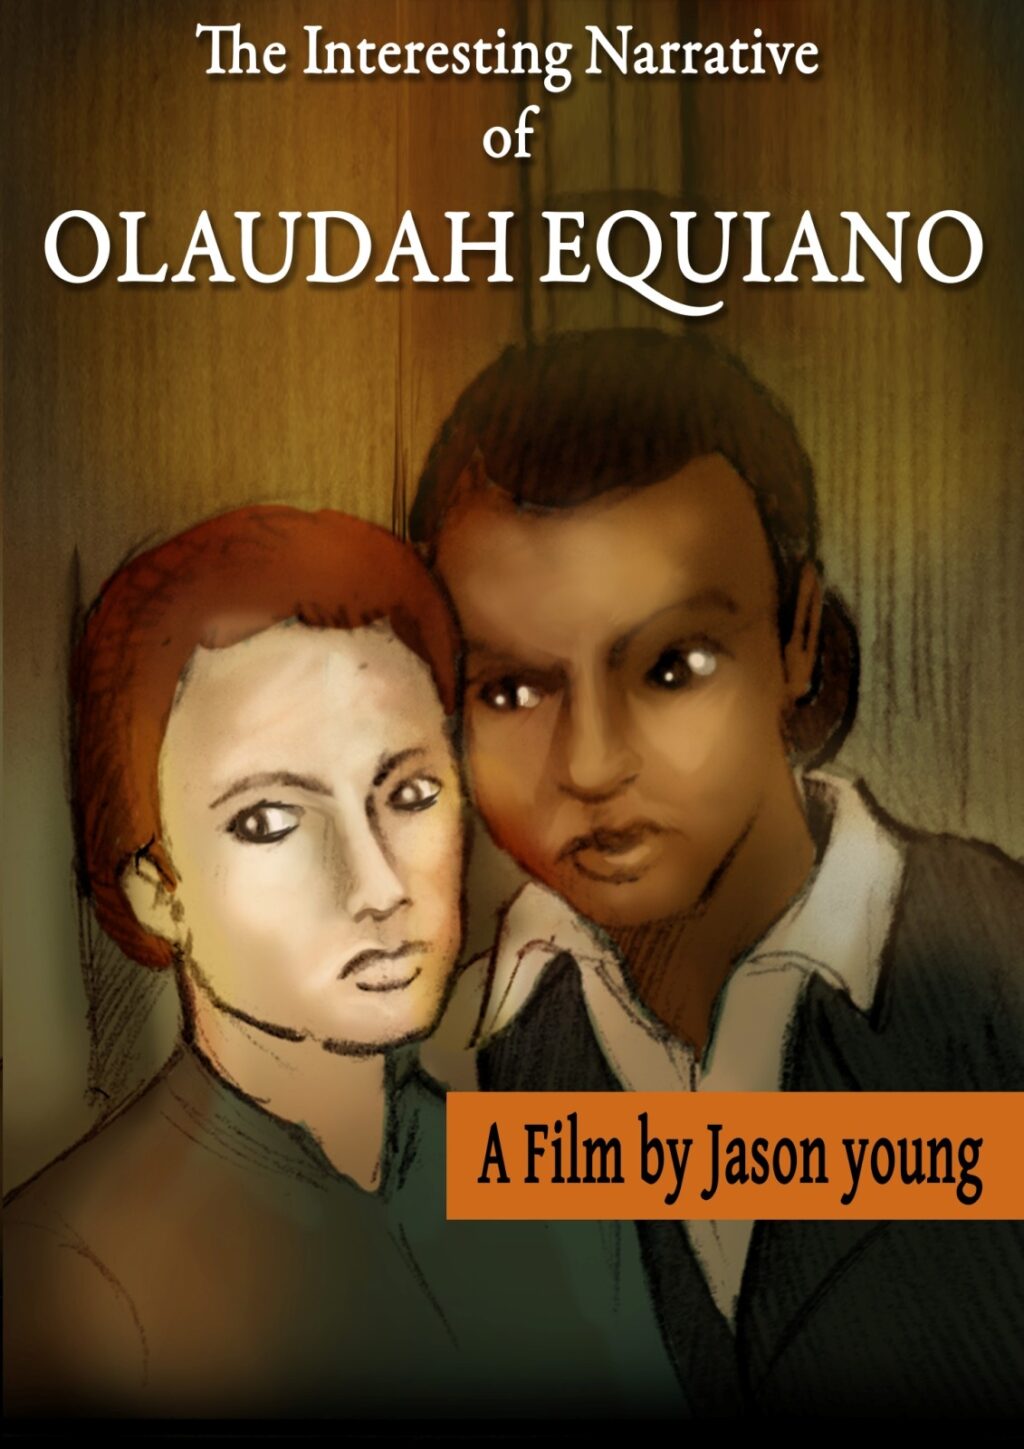 the interesting narrative by olaudah equiano